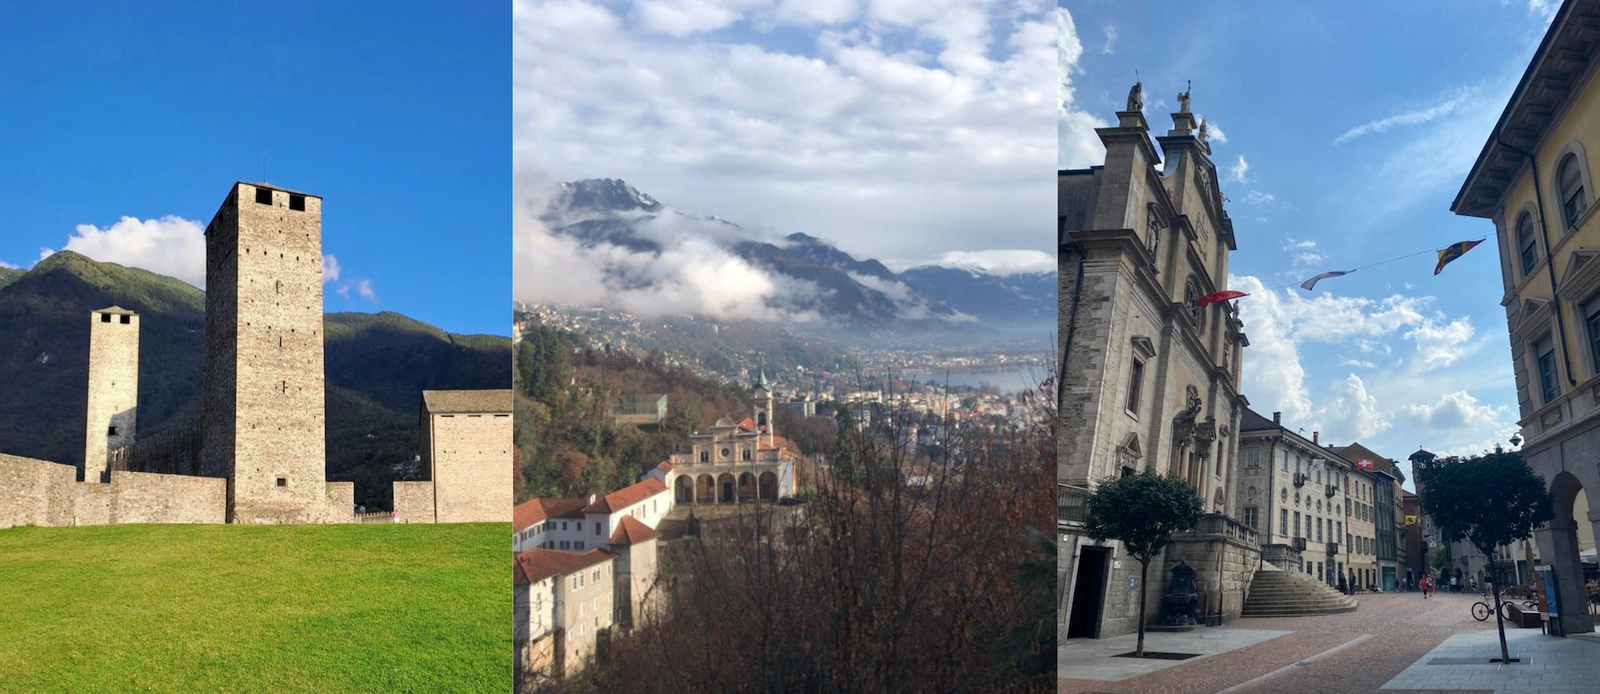 A Weekend in Ticino